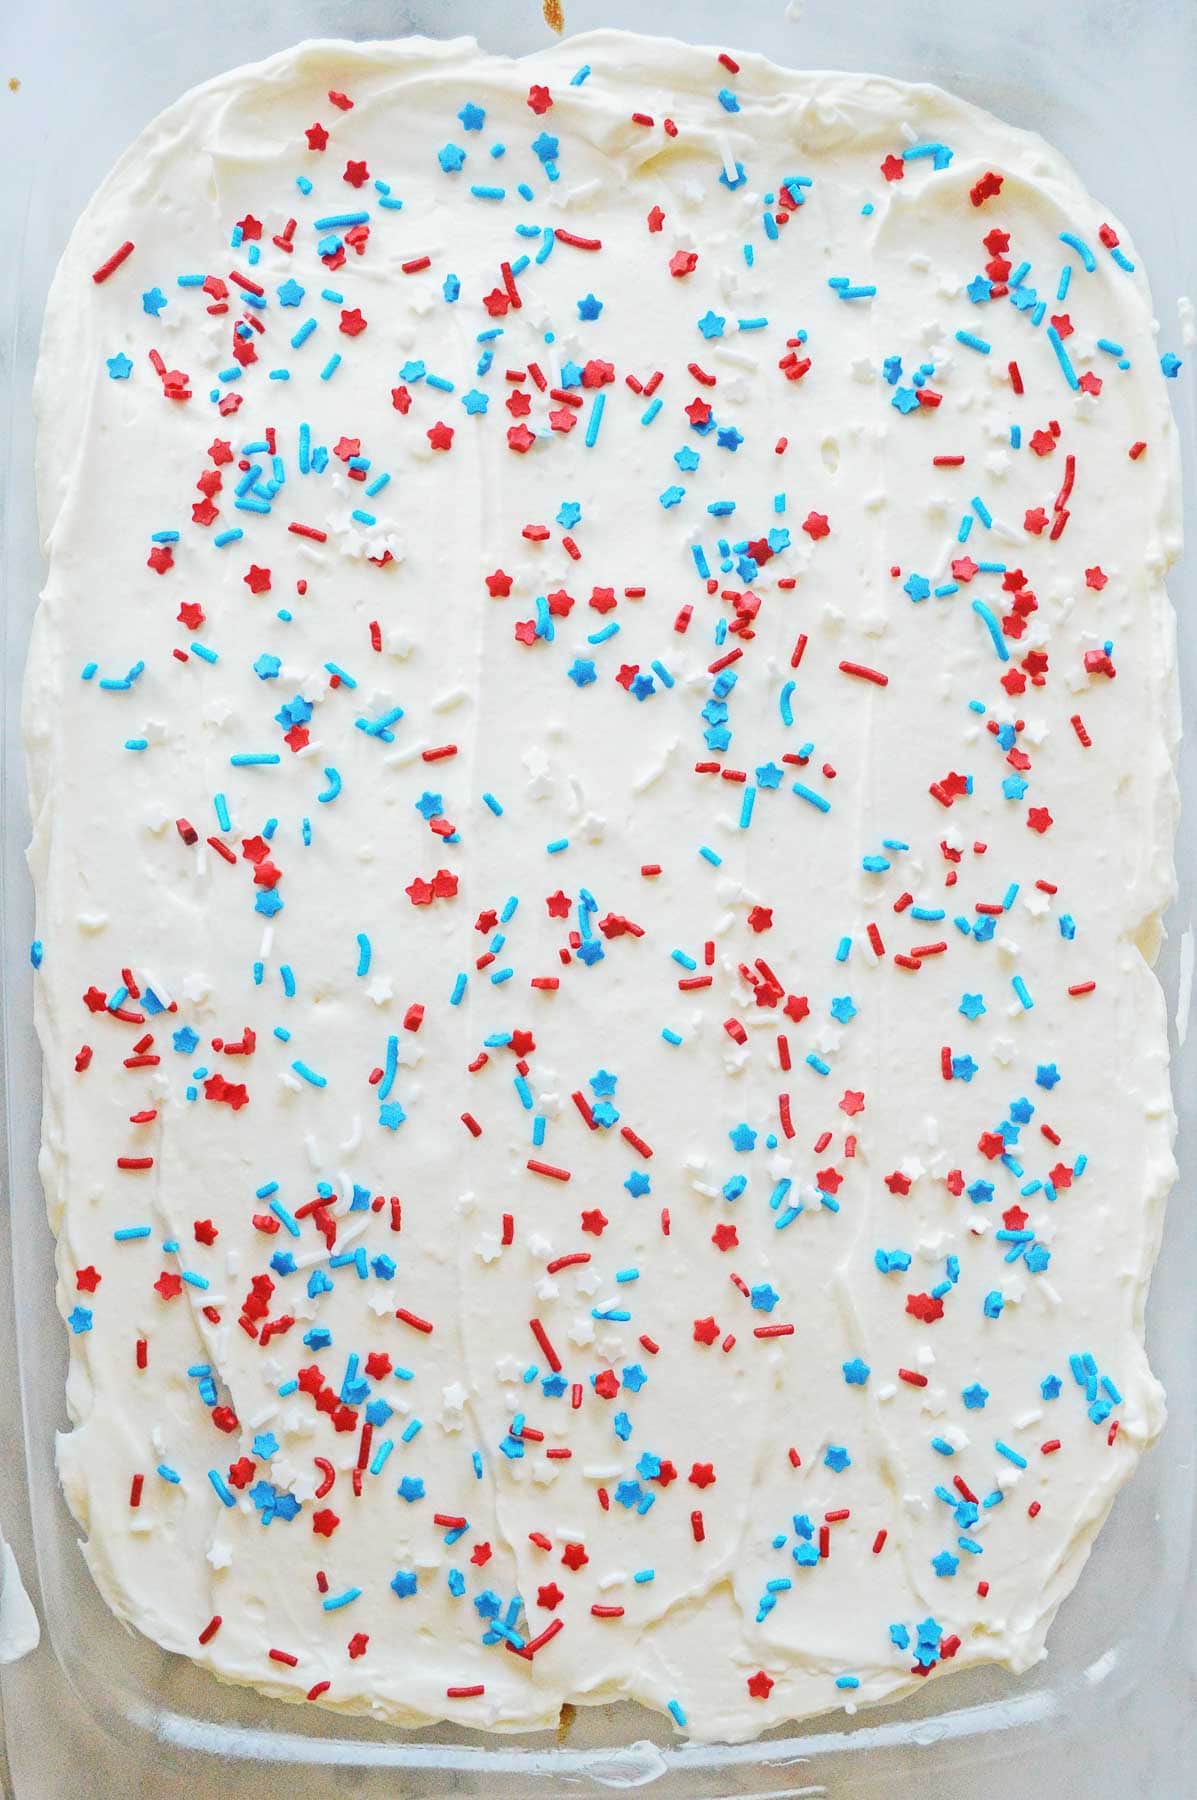 rectangle cake with white icing topped with 4th of july stars and stripes sprinkles